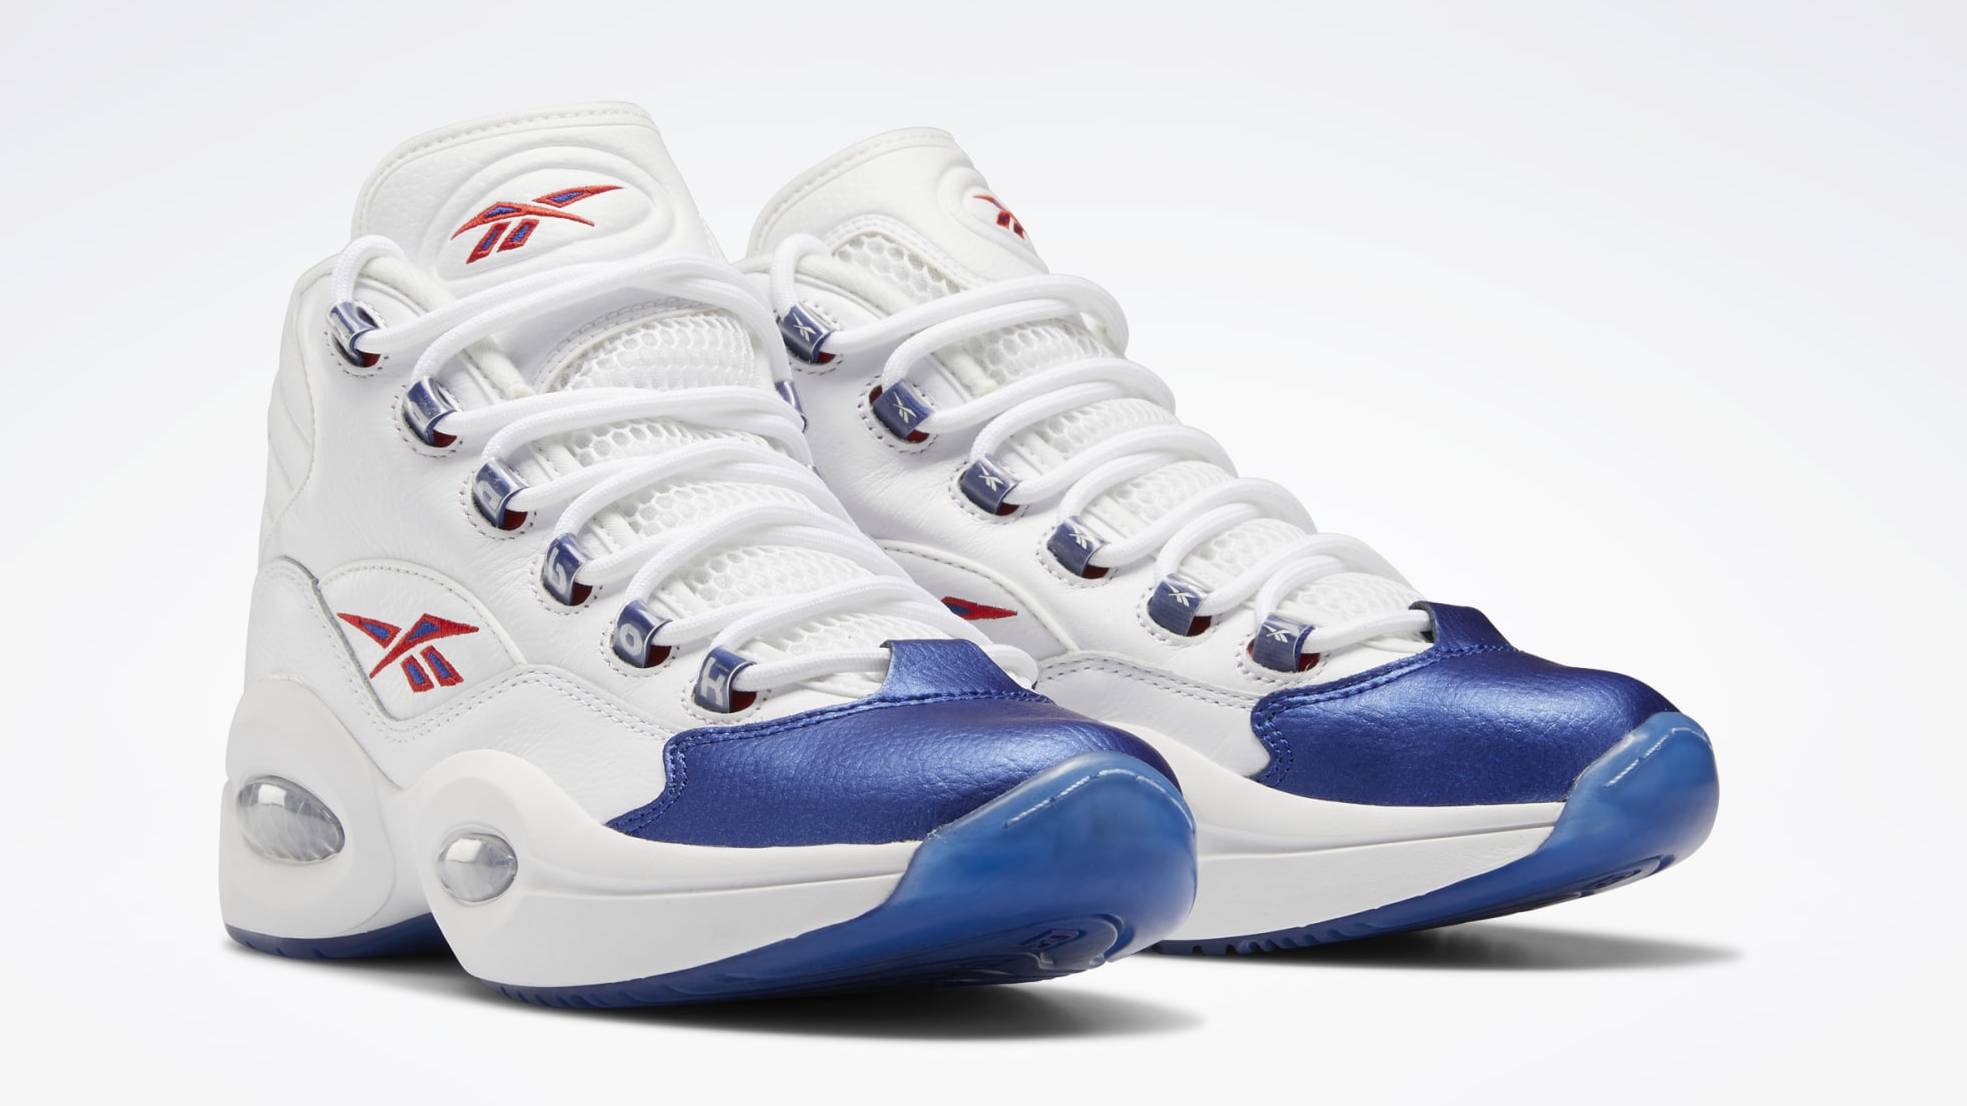 'Blue Toe' Reebok Question Mids Are Back This Month